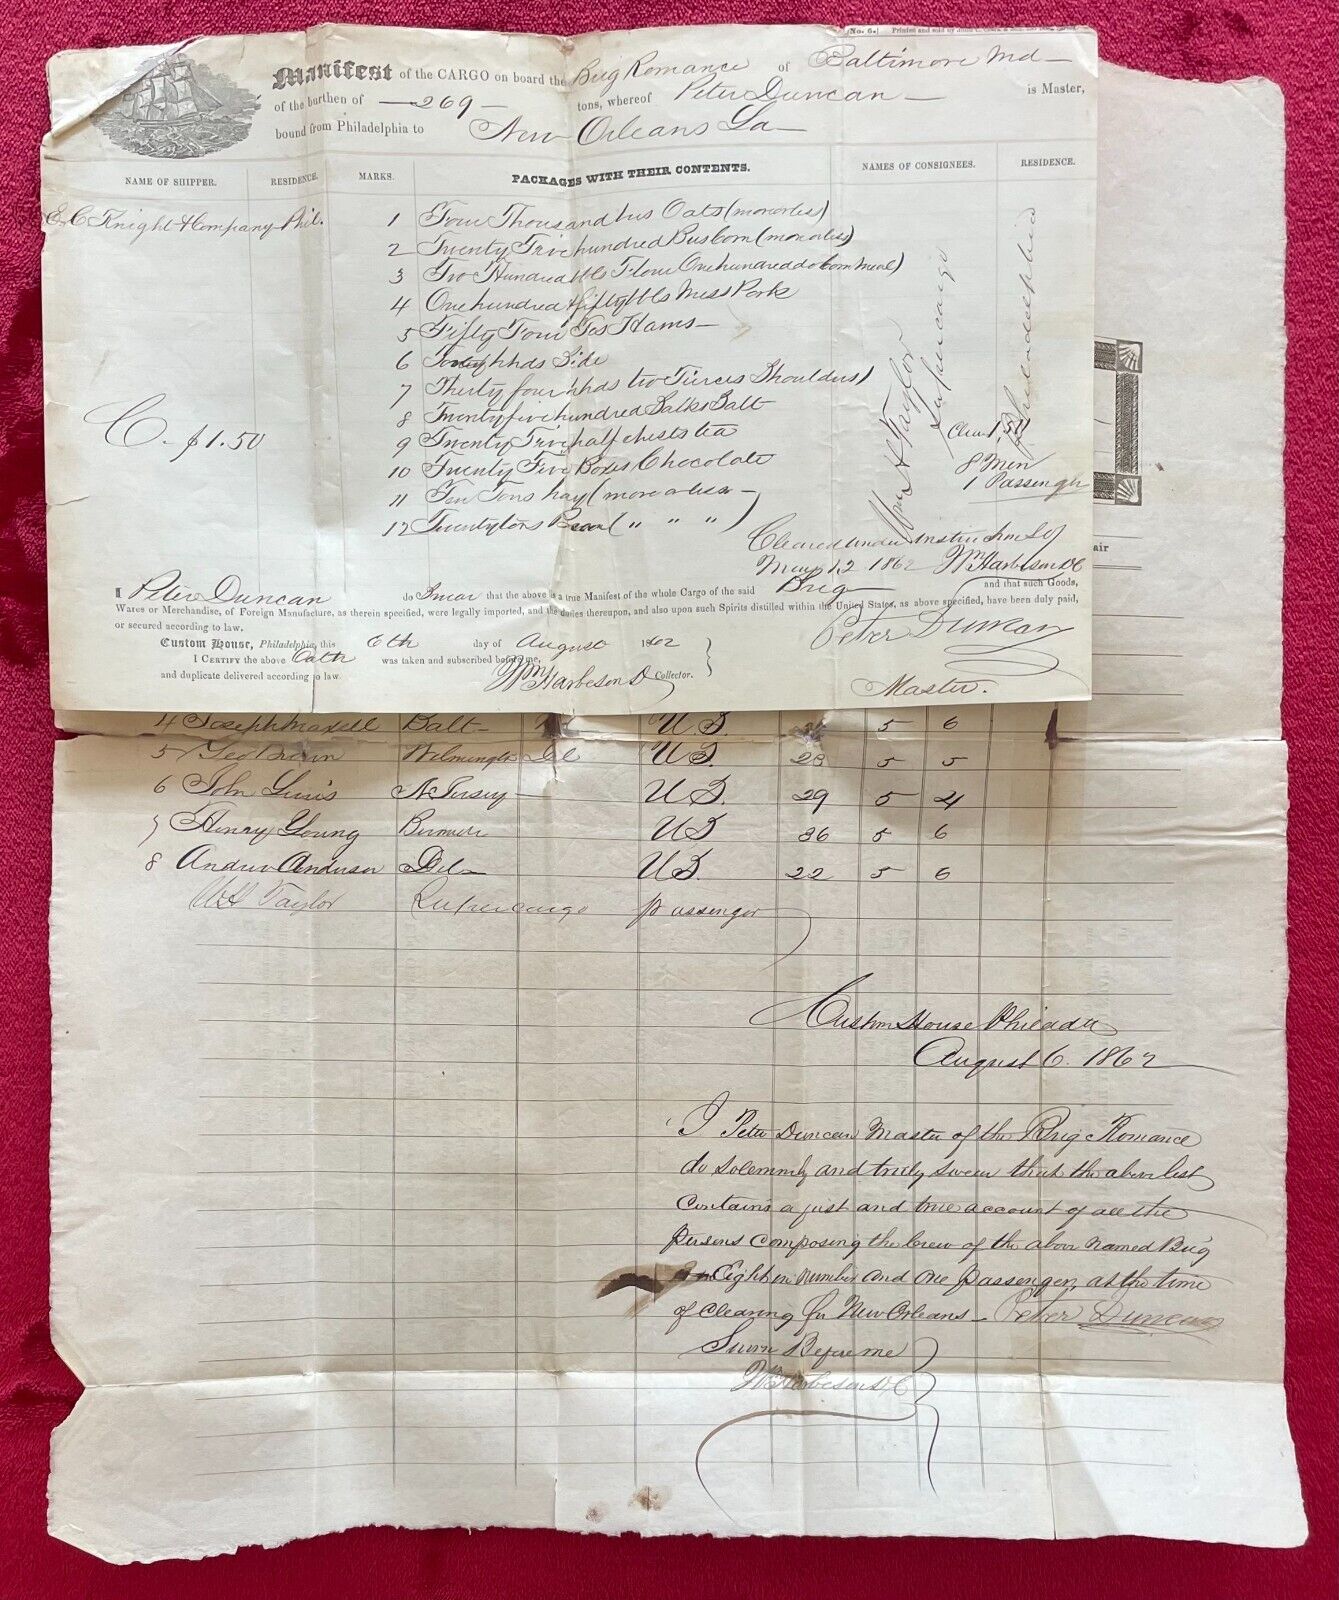 FOOD TO UNION ARMY IN NEW ORLEANS - SHIP ROMANCE - 1862 CARGO/CREW MANIFEST